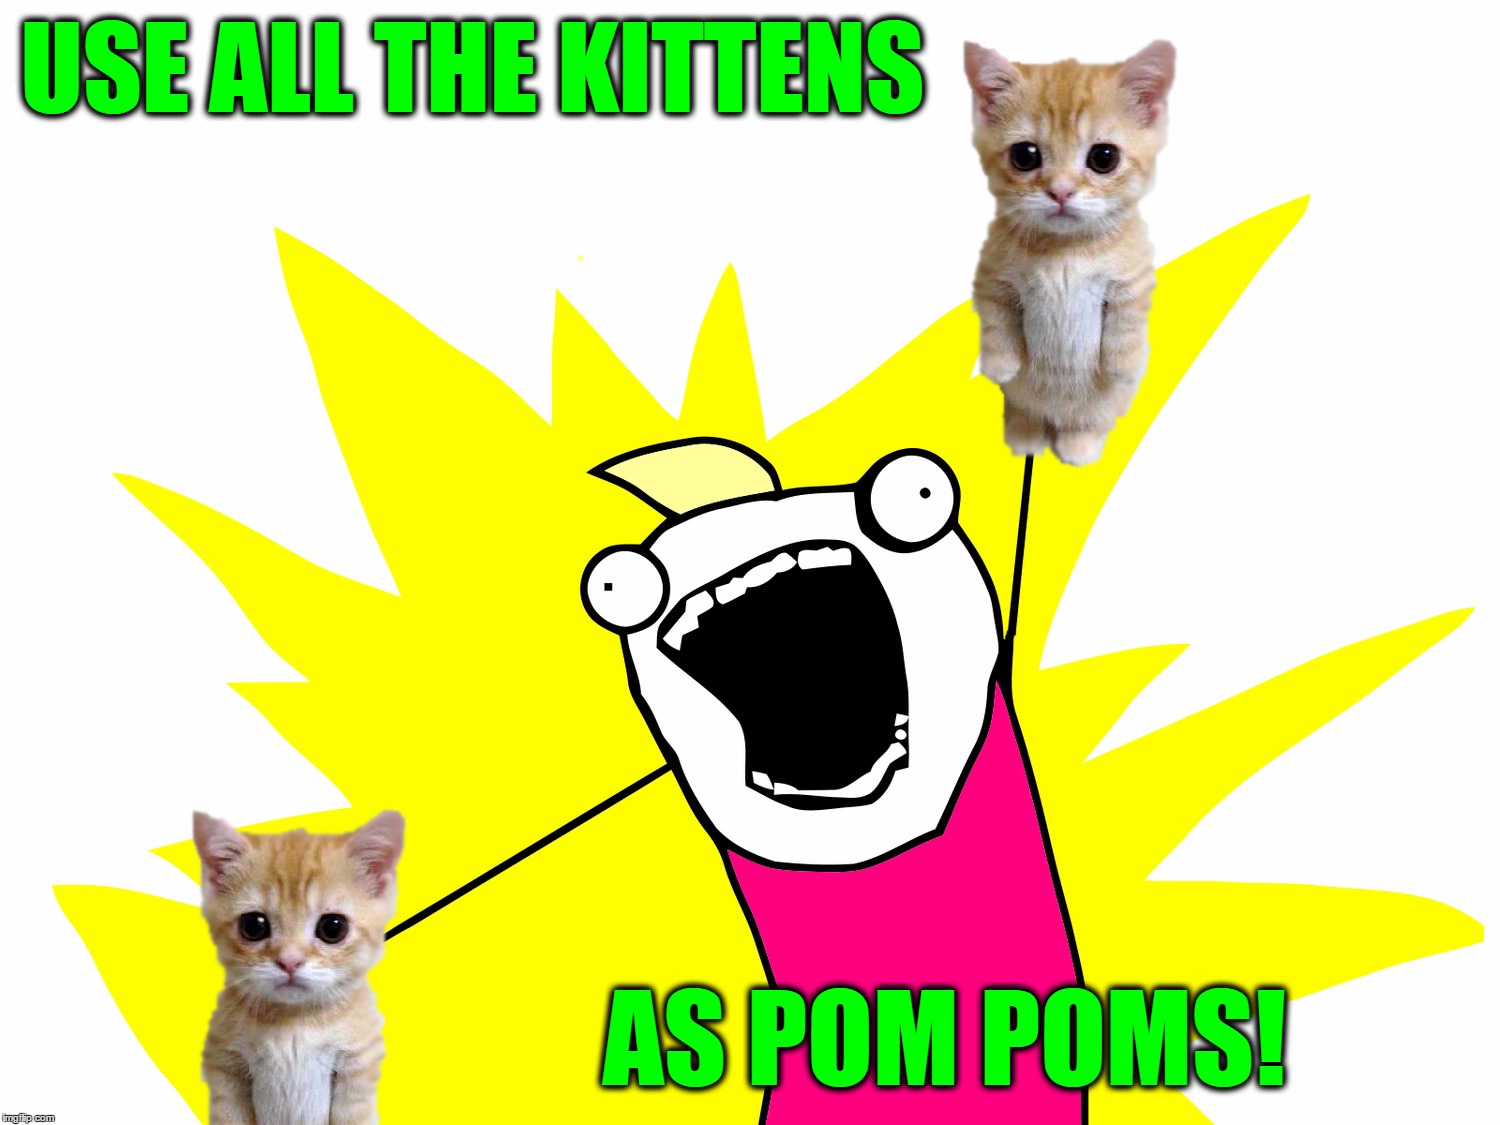 Raa Raa REE, Kick 'em in the MEME,Raa Raa RASS, Kick 'em in the OTHER MEME | USE ALL THE KITTENS; AS POM POMS! | image tagged in x all the y - cute cat pom poms,memes,cute cat,x all the y,cheerleading,cheerleader | made w/ Imgflip meme maker